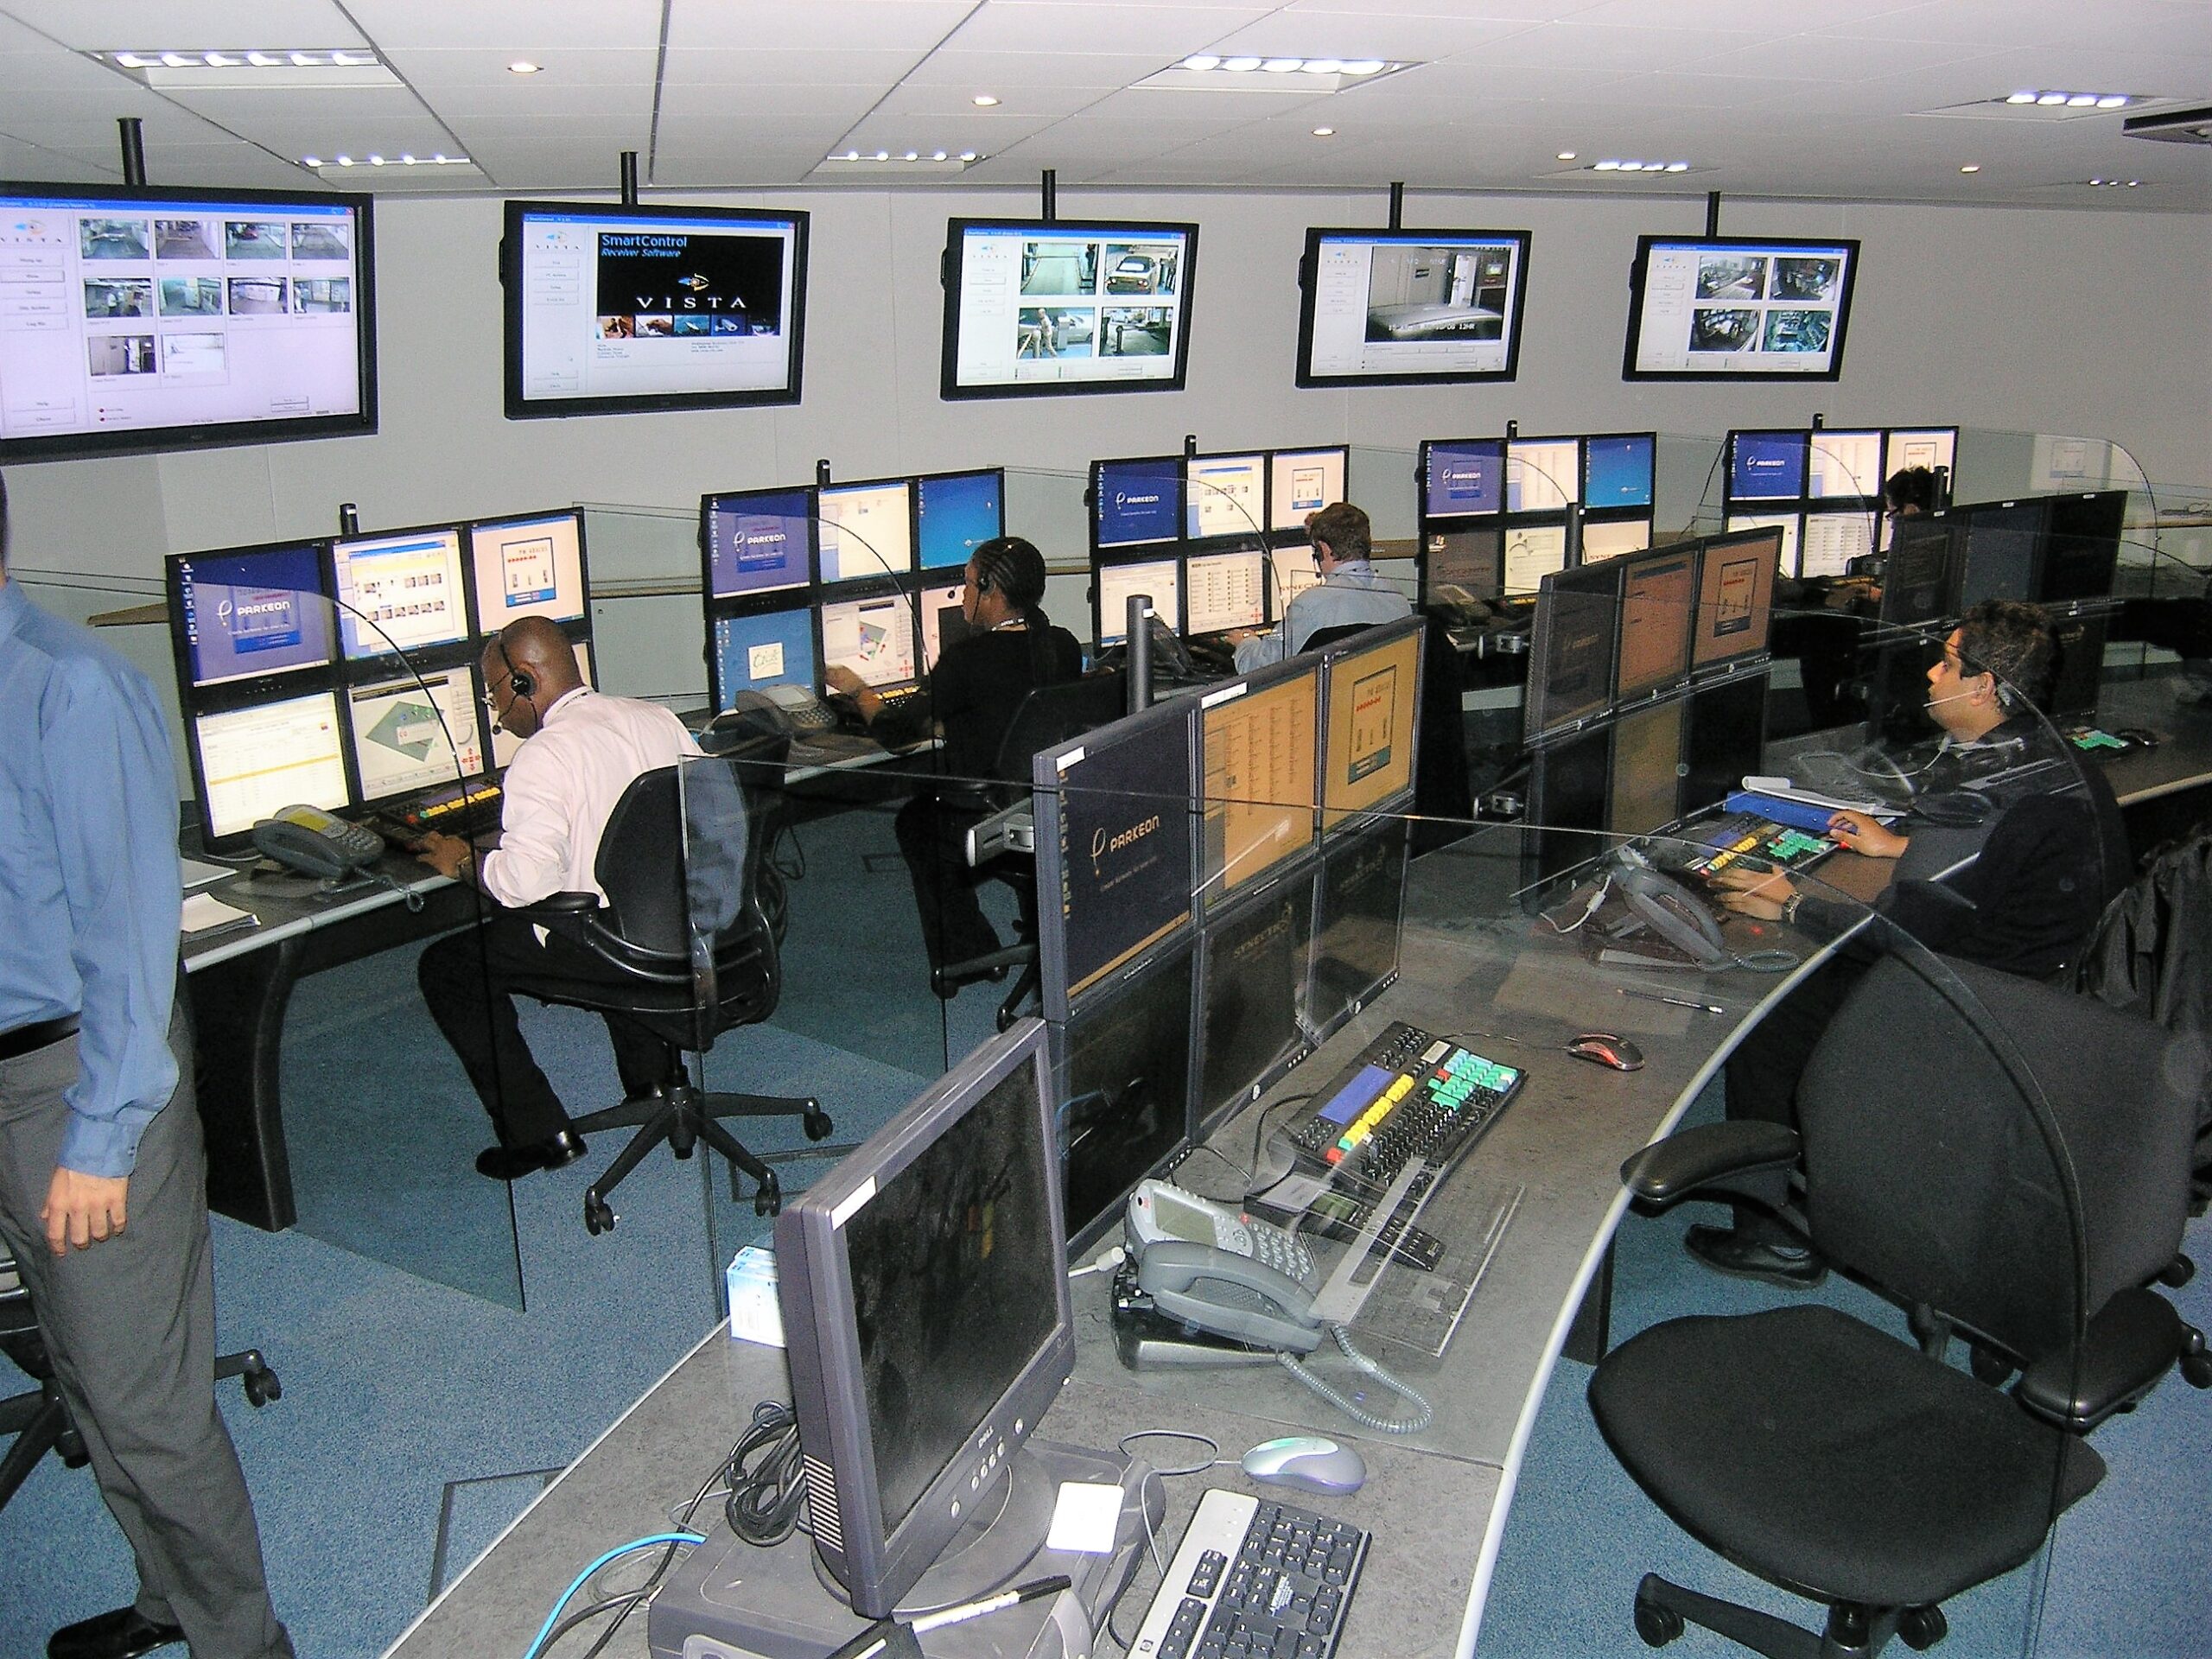 control room centre with bespoke security furniture